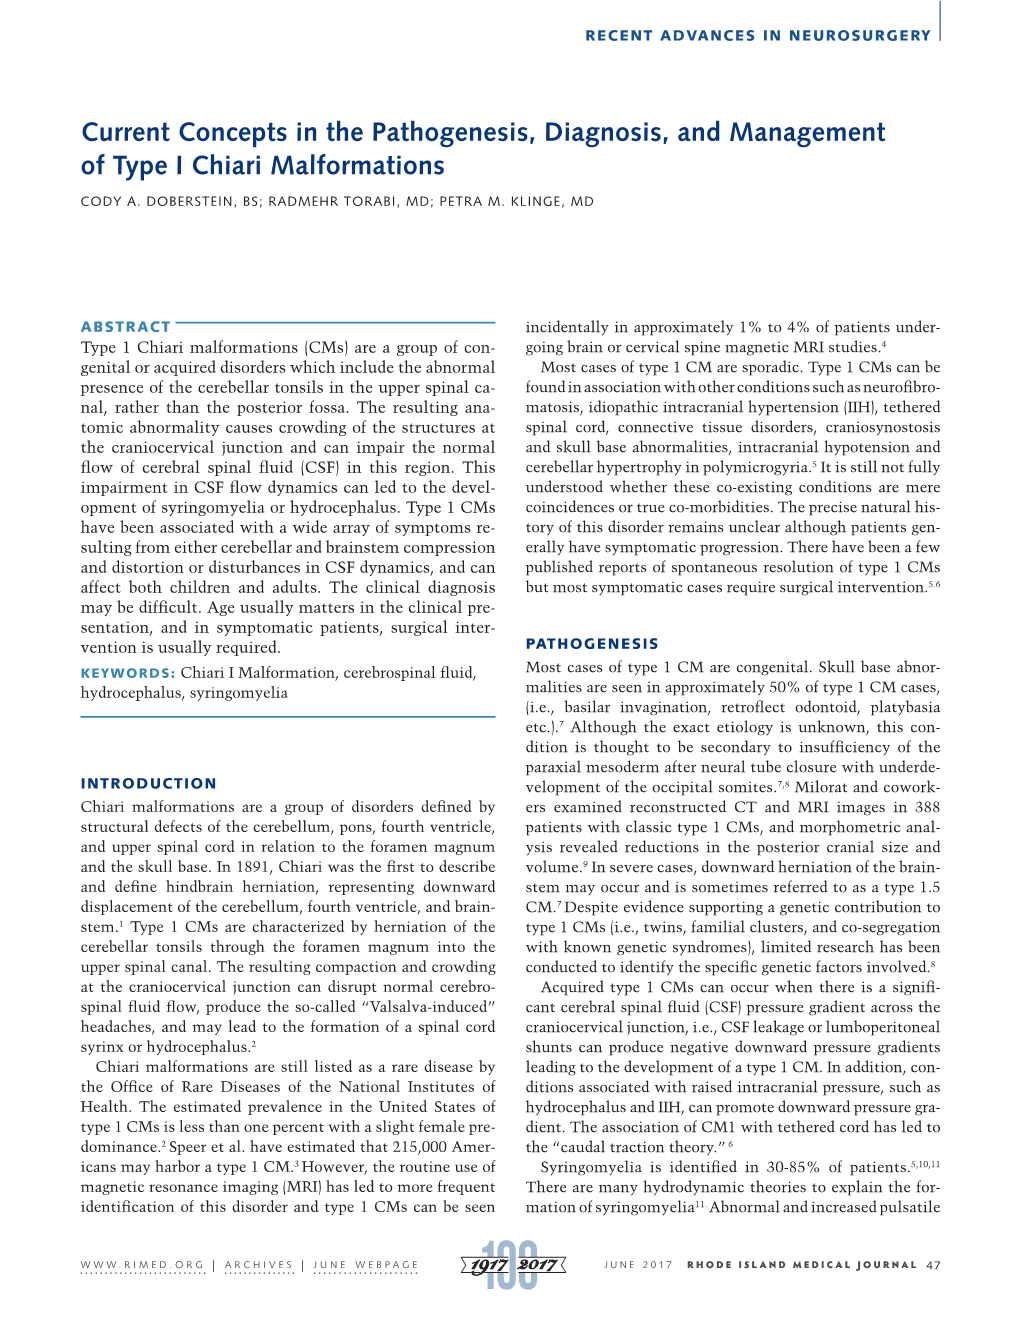 Current Concepts in the Pathogenesis, Diagnosis, and Management of Type I Chiari Malformations